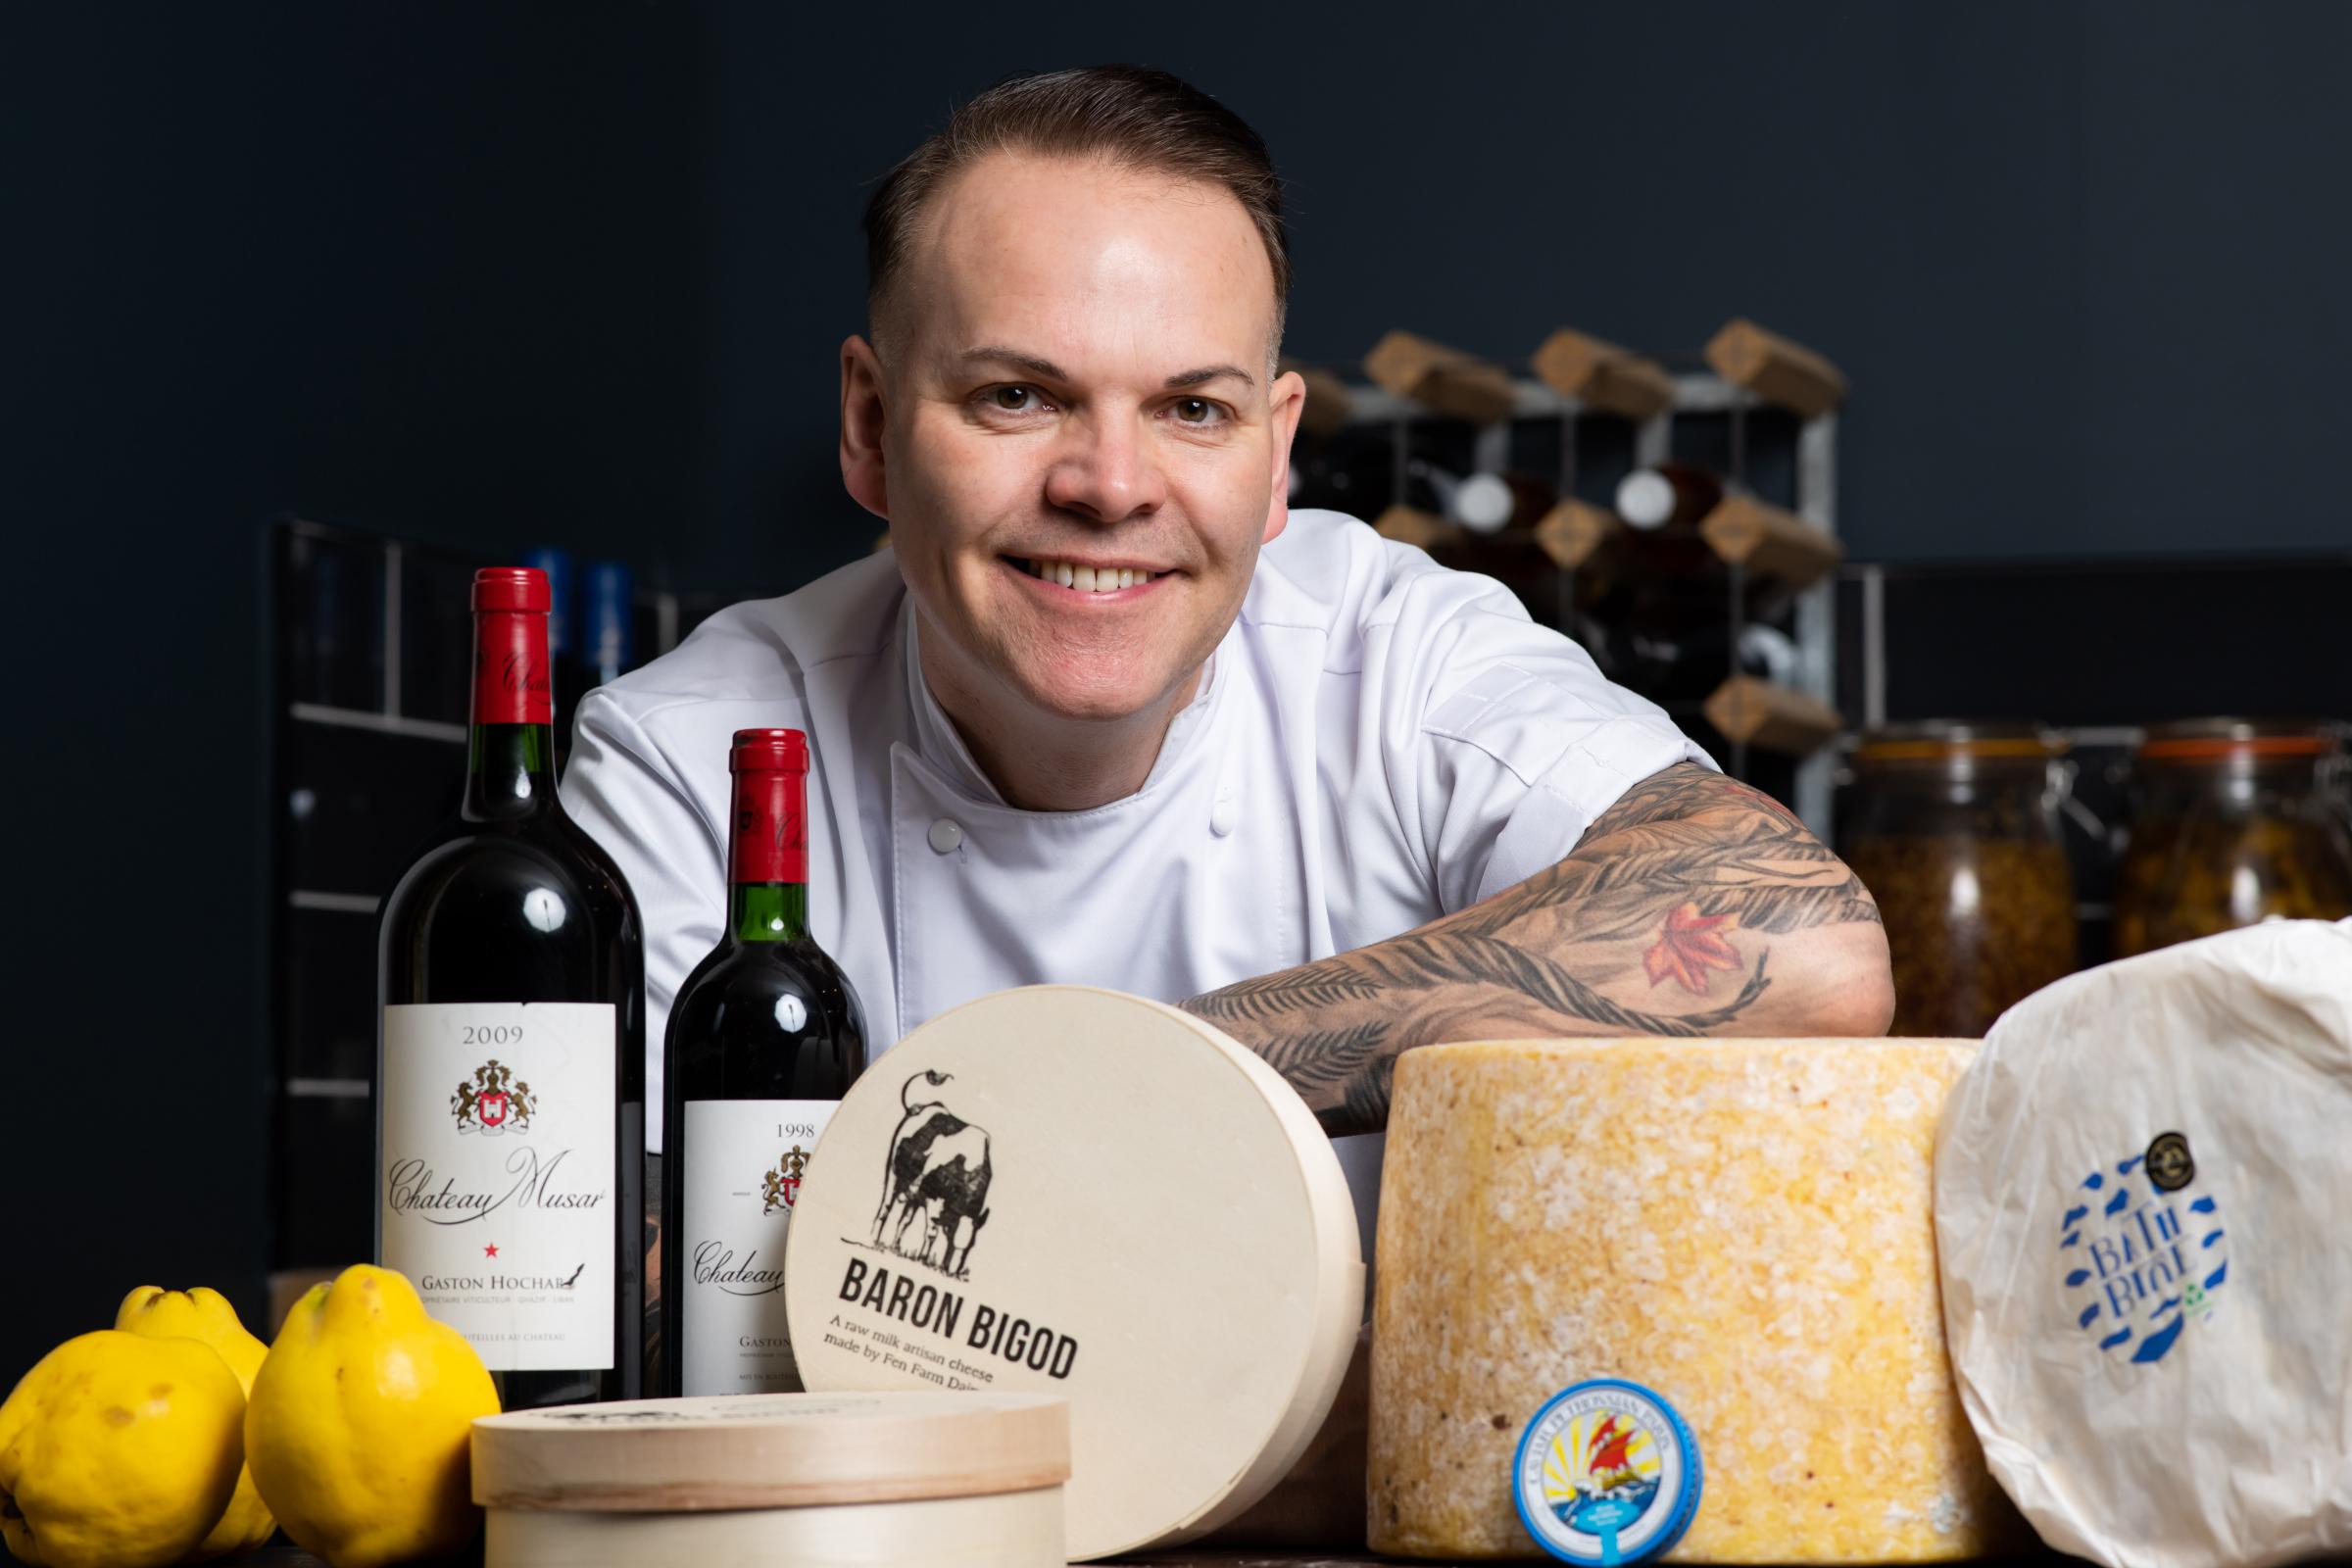 Homage is a tribute to great cheese and wine (Image: Simon Wood).